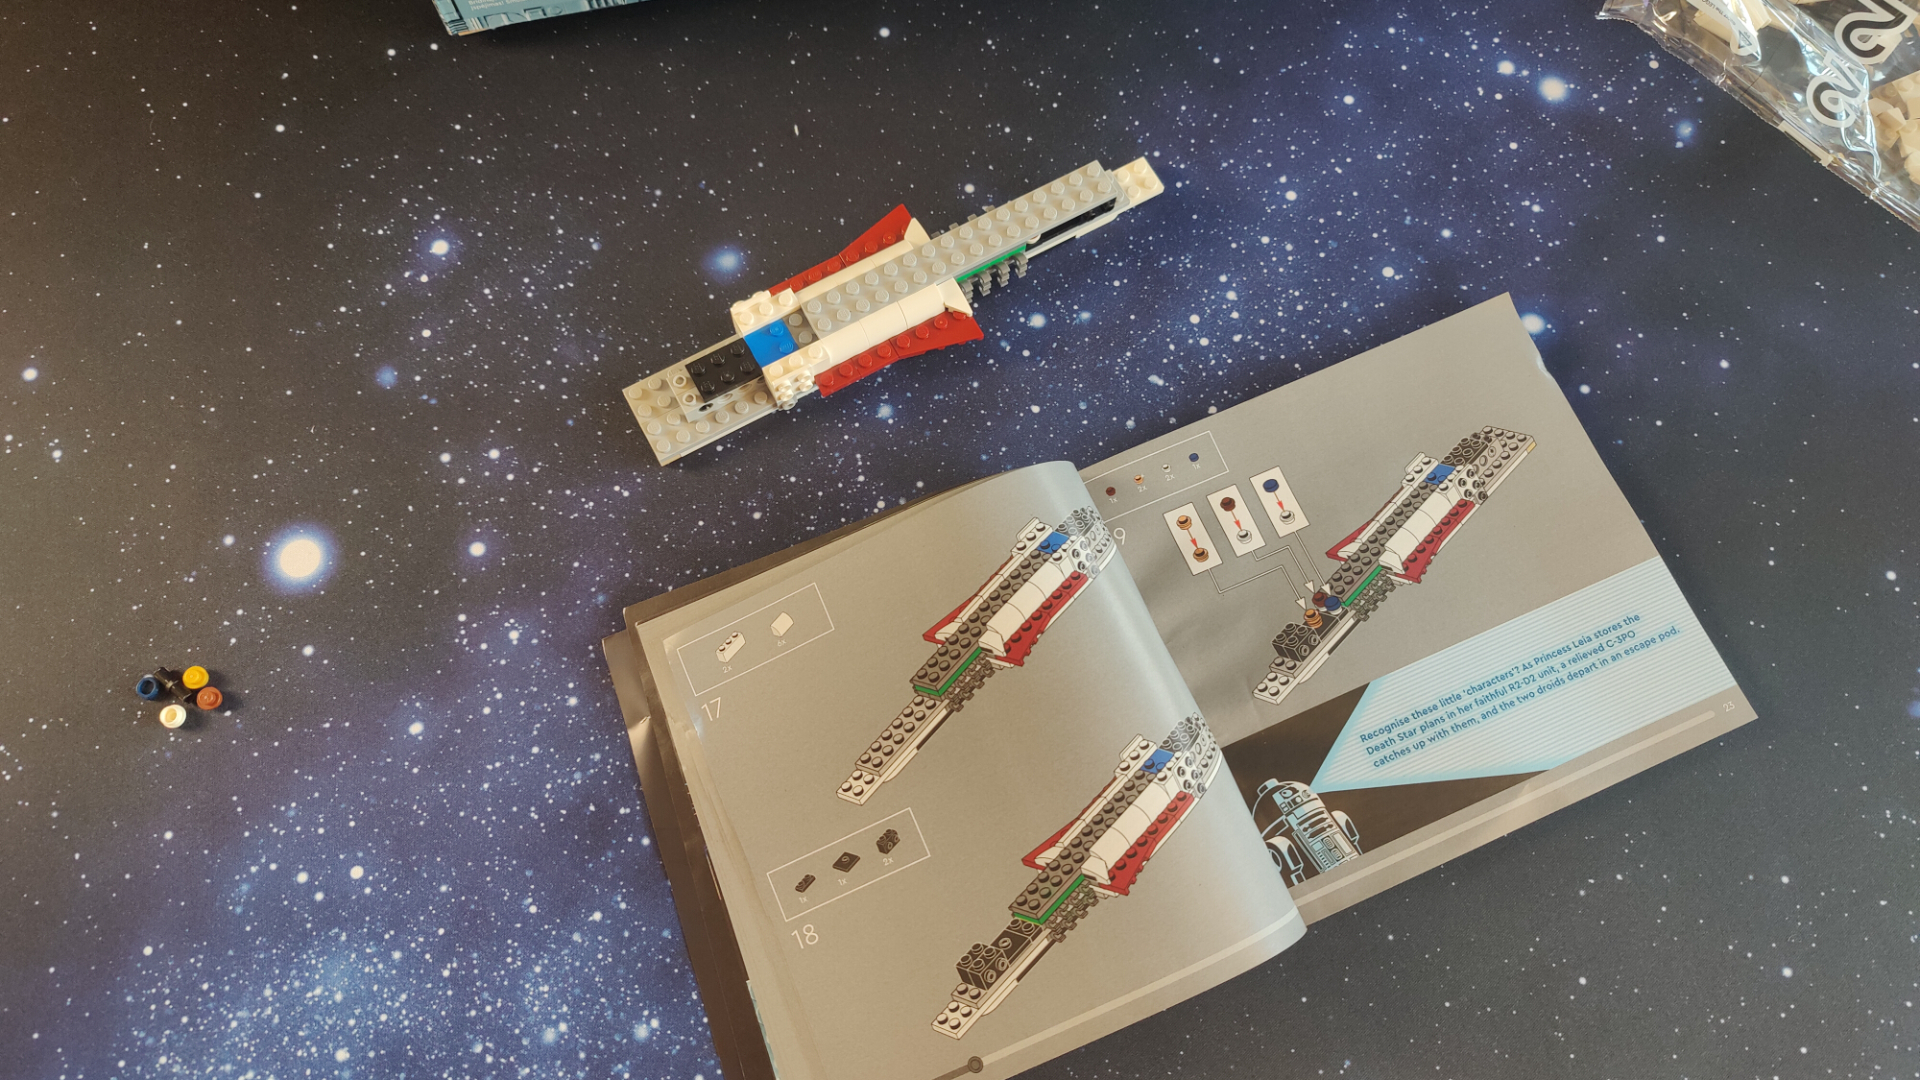 Lego Tantive IV set in pieces on a starry background, with the instructions open below it